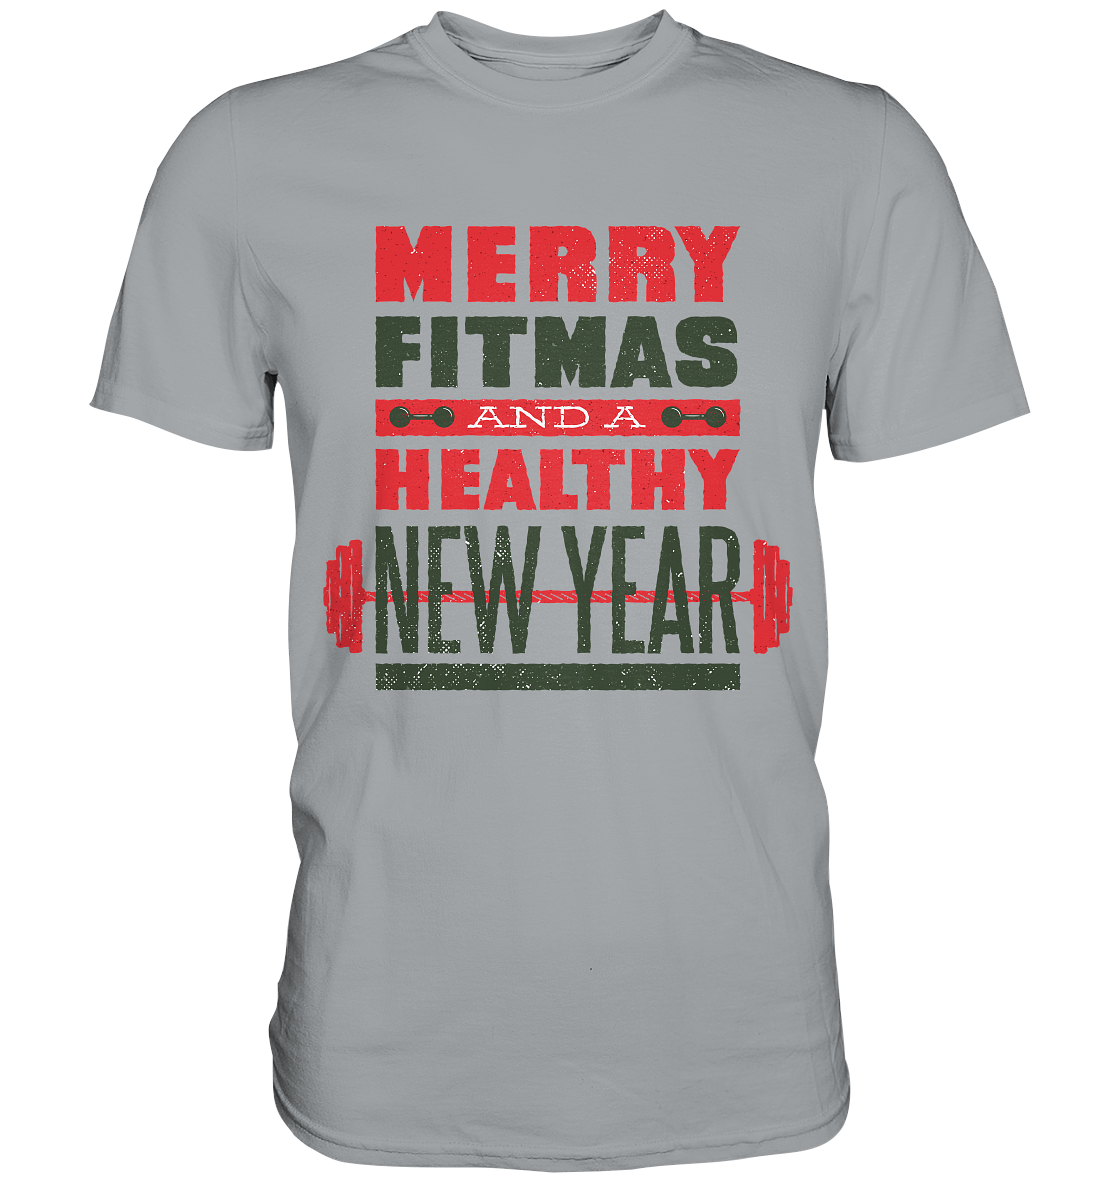 Weihnachtliches Design, Gym, Merry Fitmas and a Healthy New Year - Classic Shirt